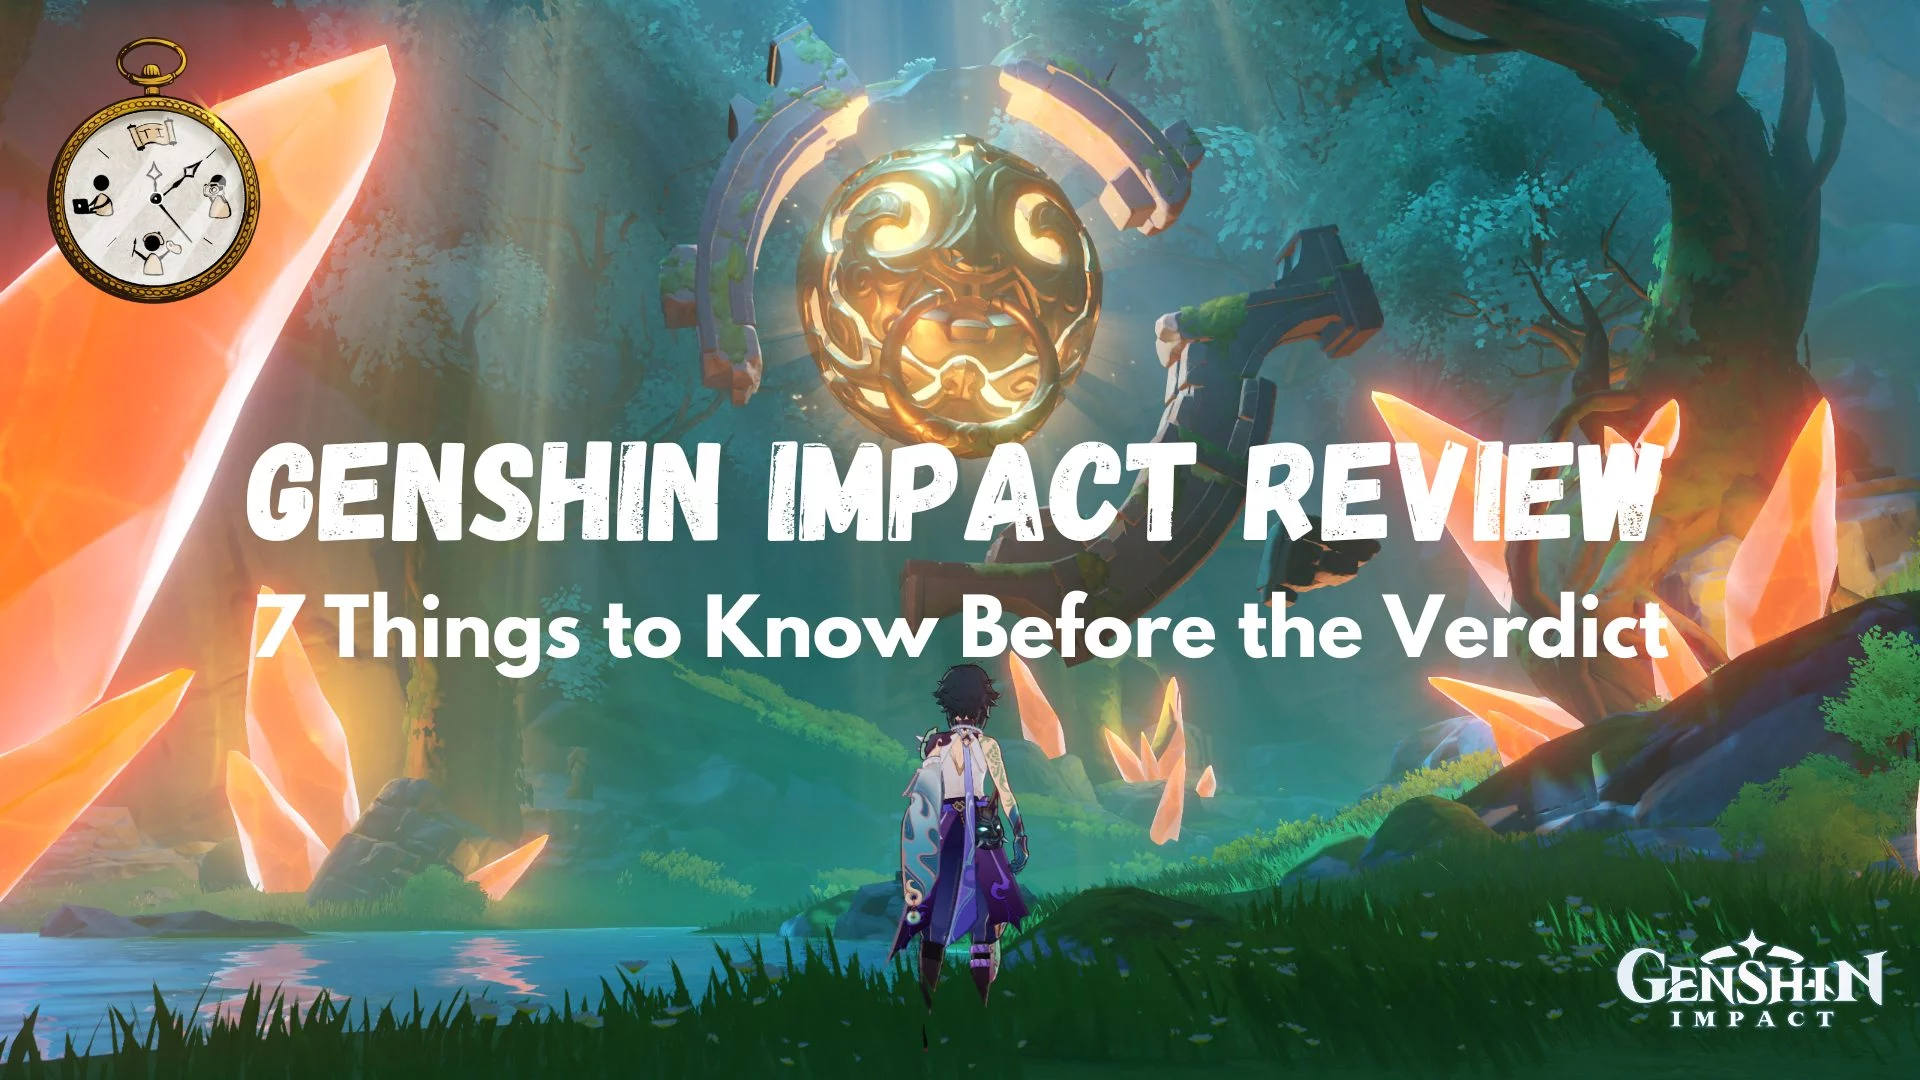 21-page Genshin Impact damage calculation guide